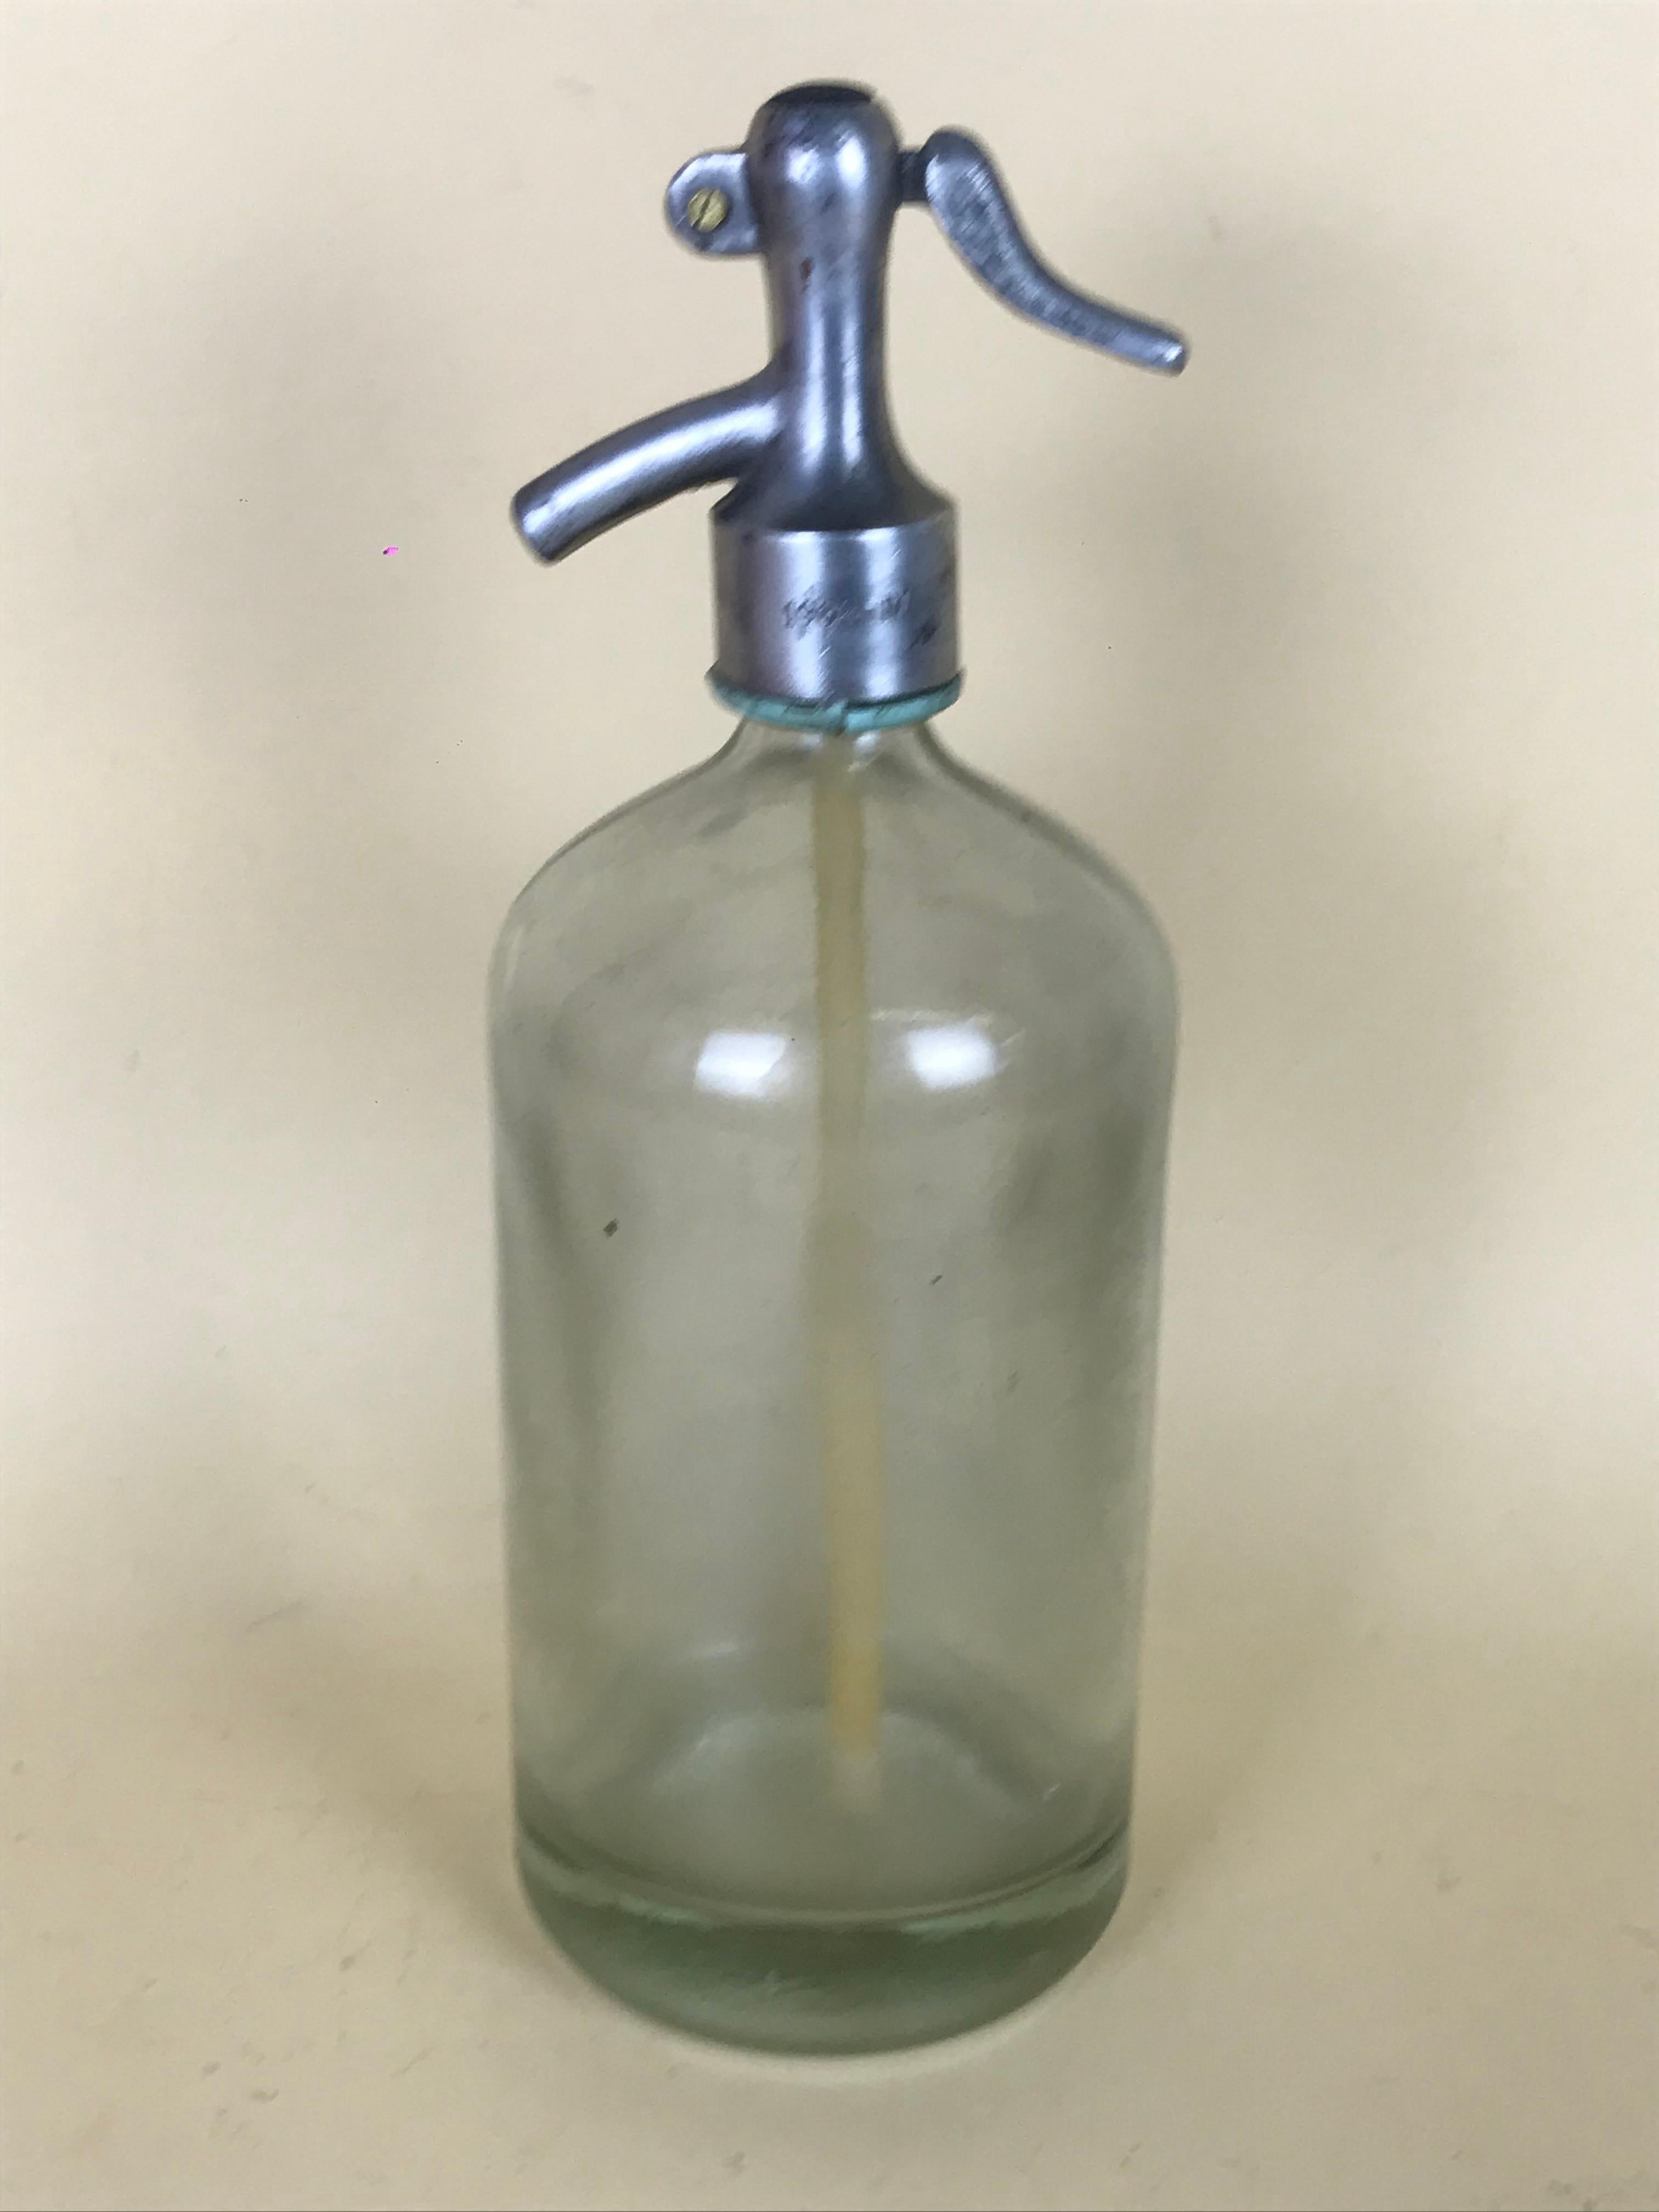 1920s American Advertising Glass Syphon Coca-Cola Acid Etched Bar Bottle Seltzer For Sale 2